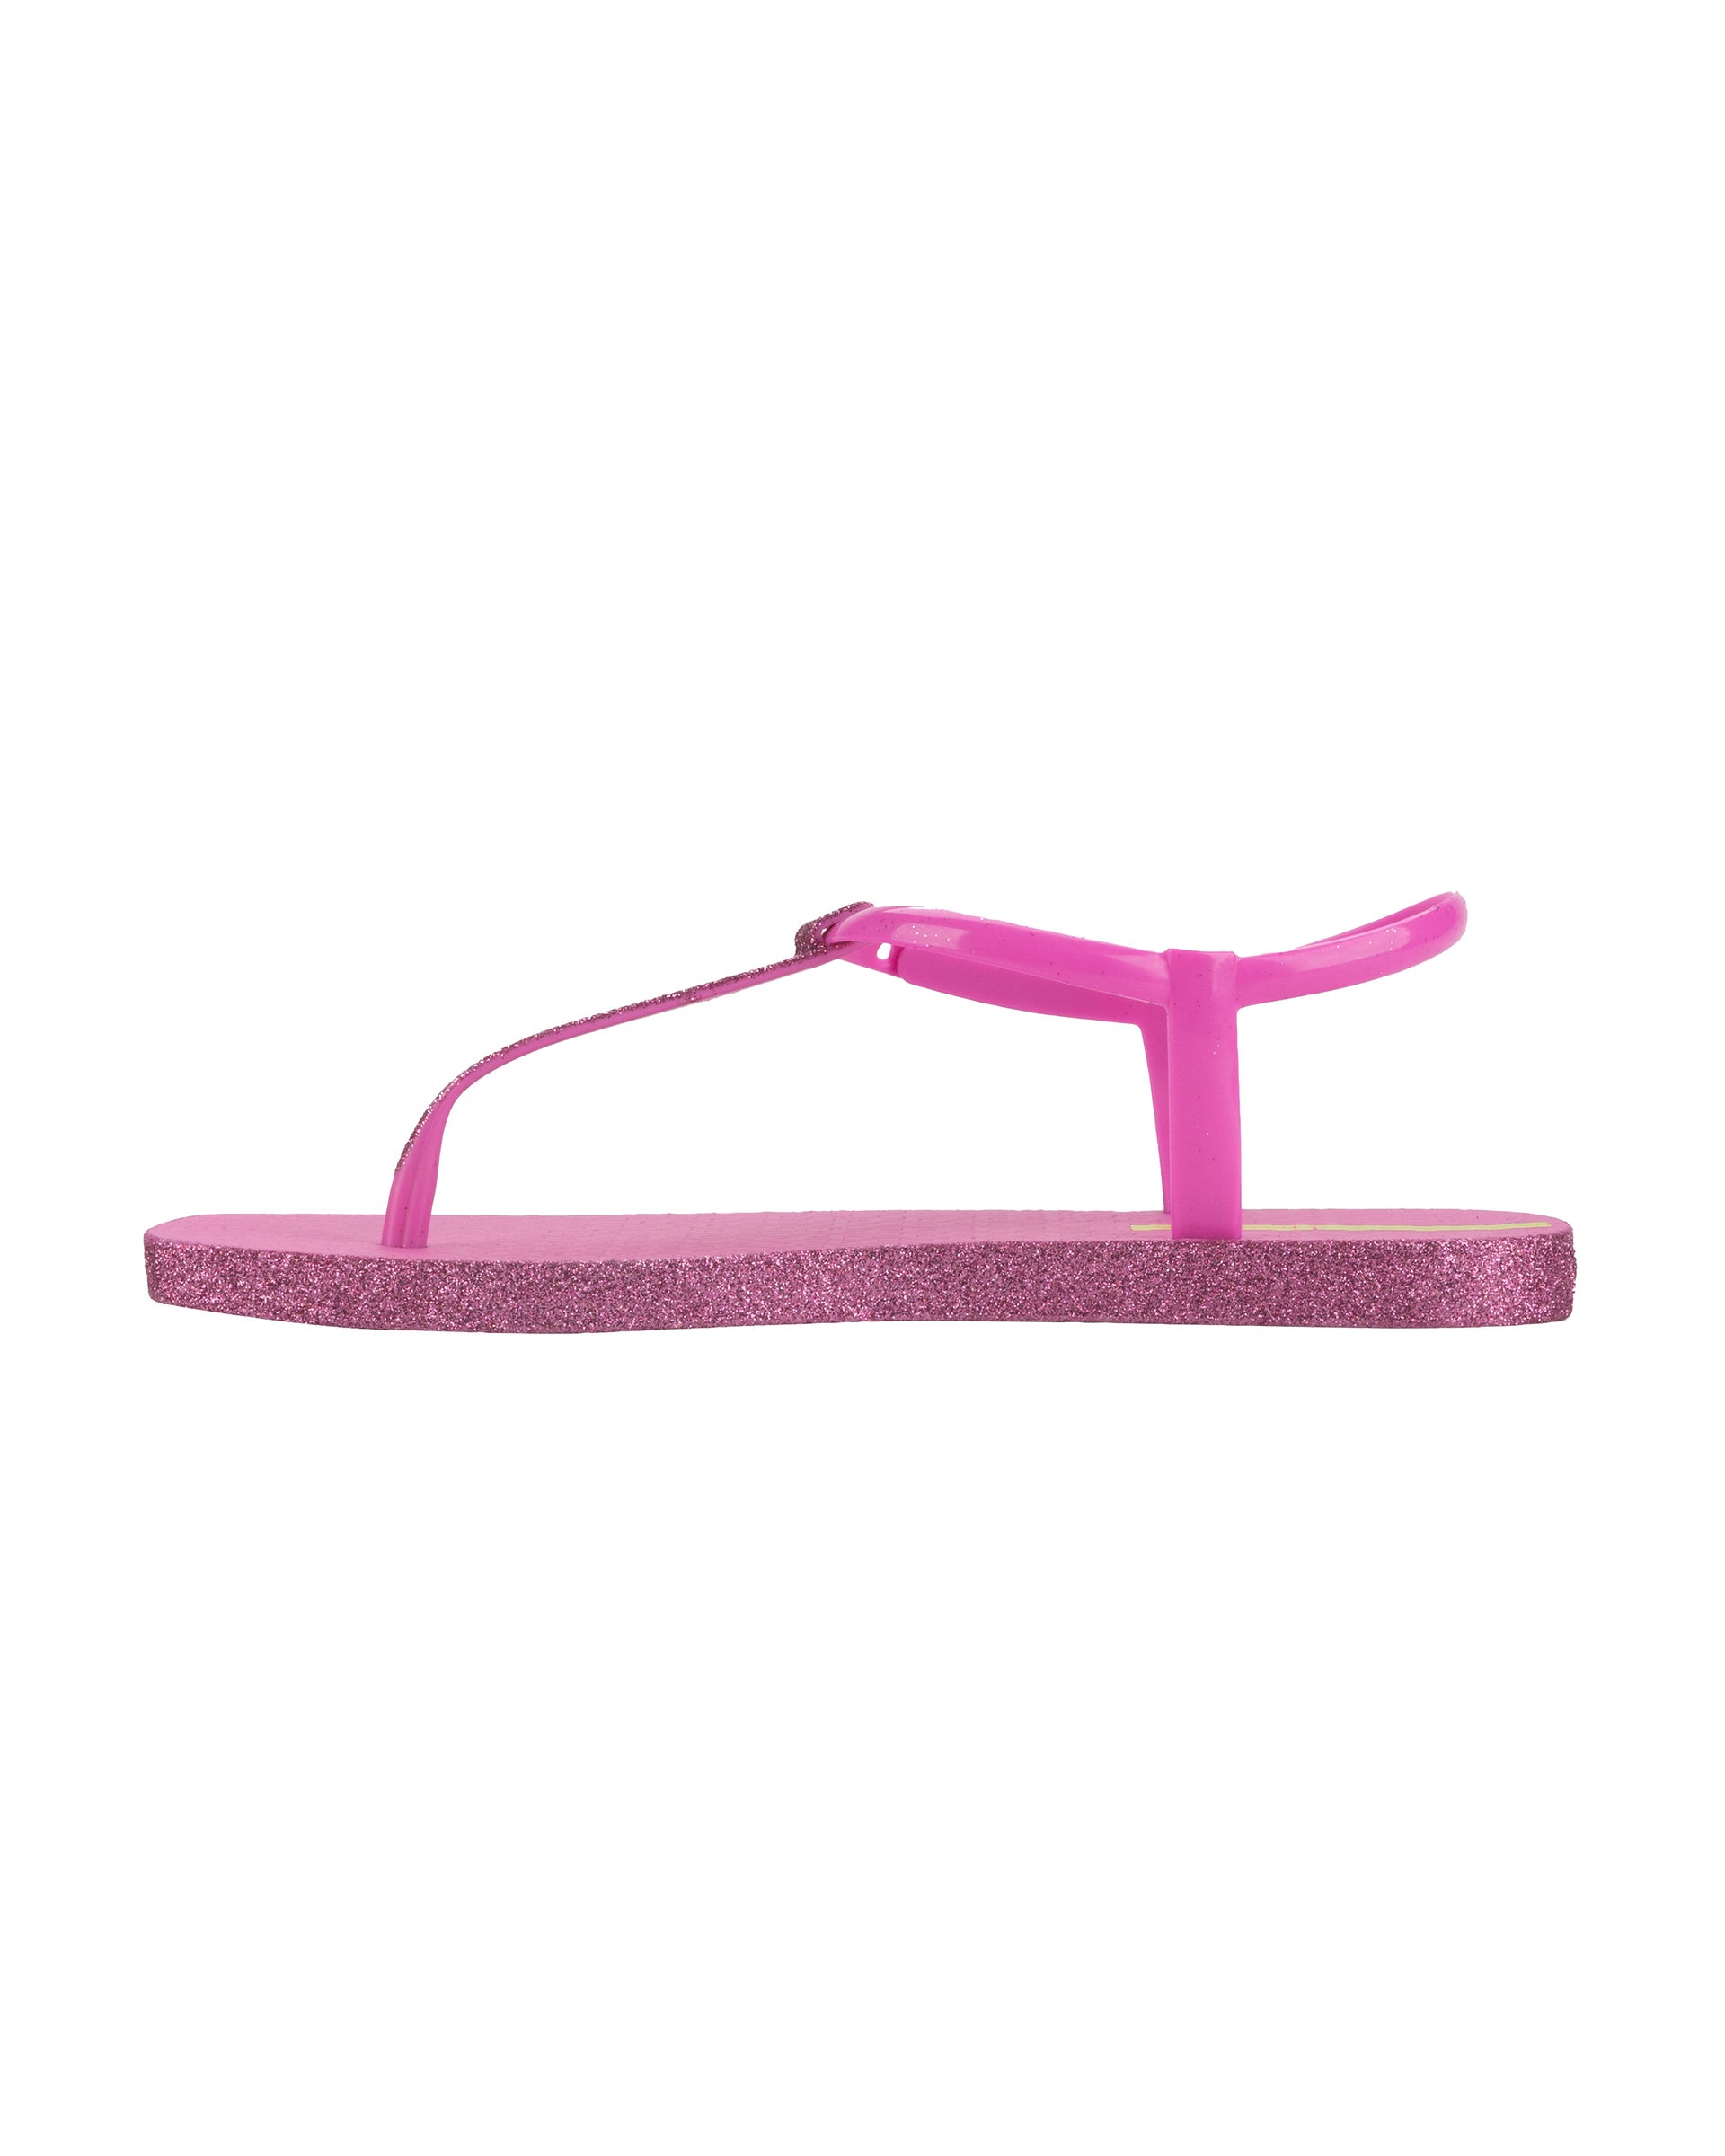 Inner side view of a pink Ipanema Class Edge Glow t-strap women's sandal with glitter pink thong.